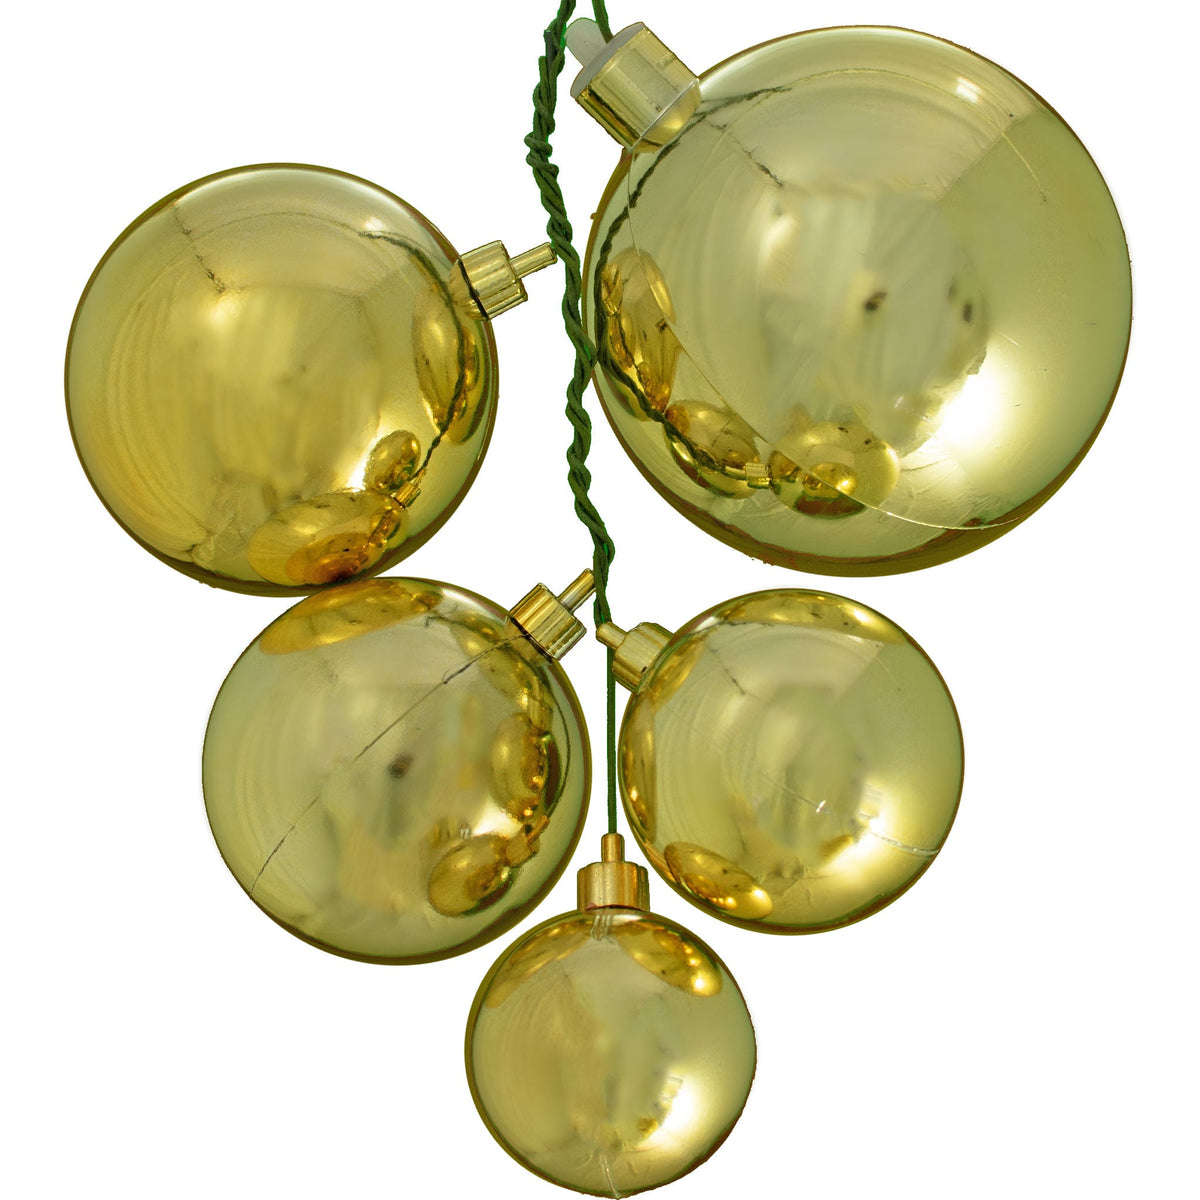 Colors include:  5 - Shiny Gold Ball Ornaments (100MM, 80MM, 70MM, 60MM, & 50MM)